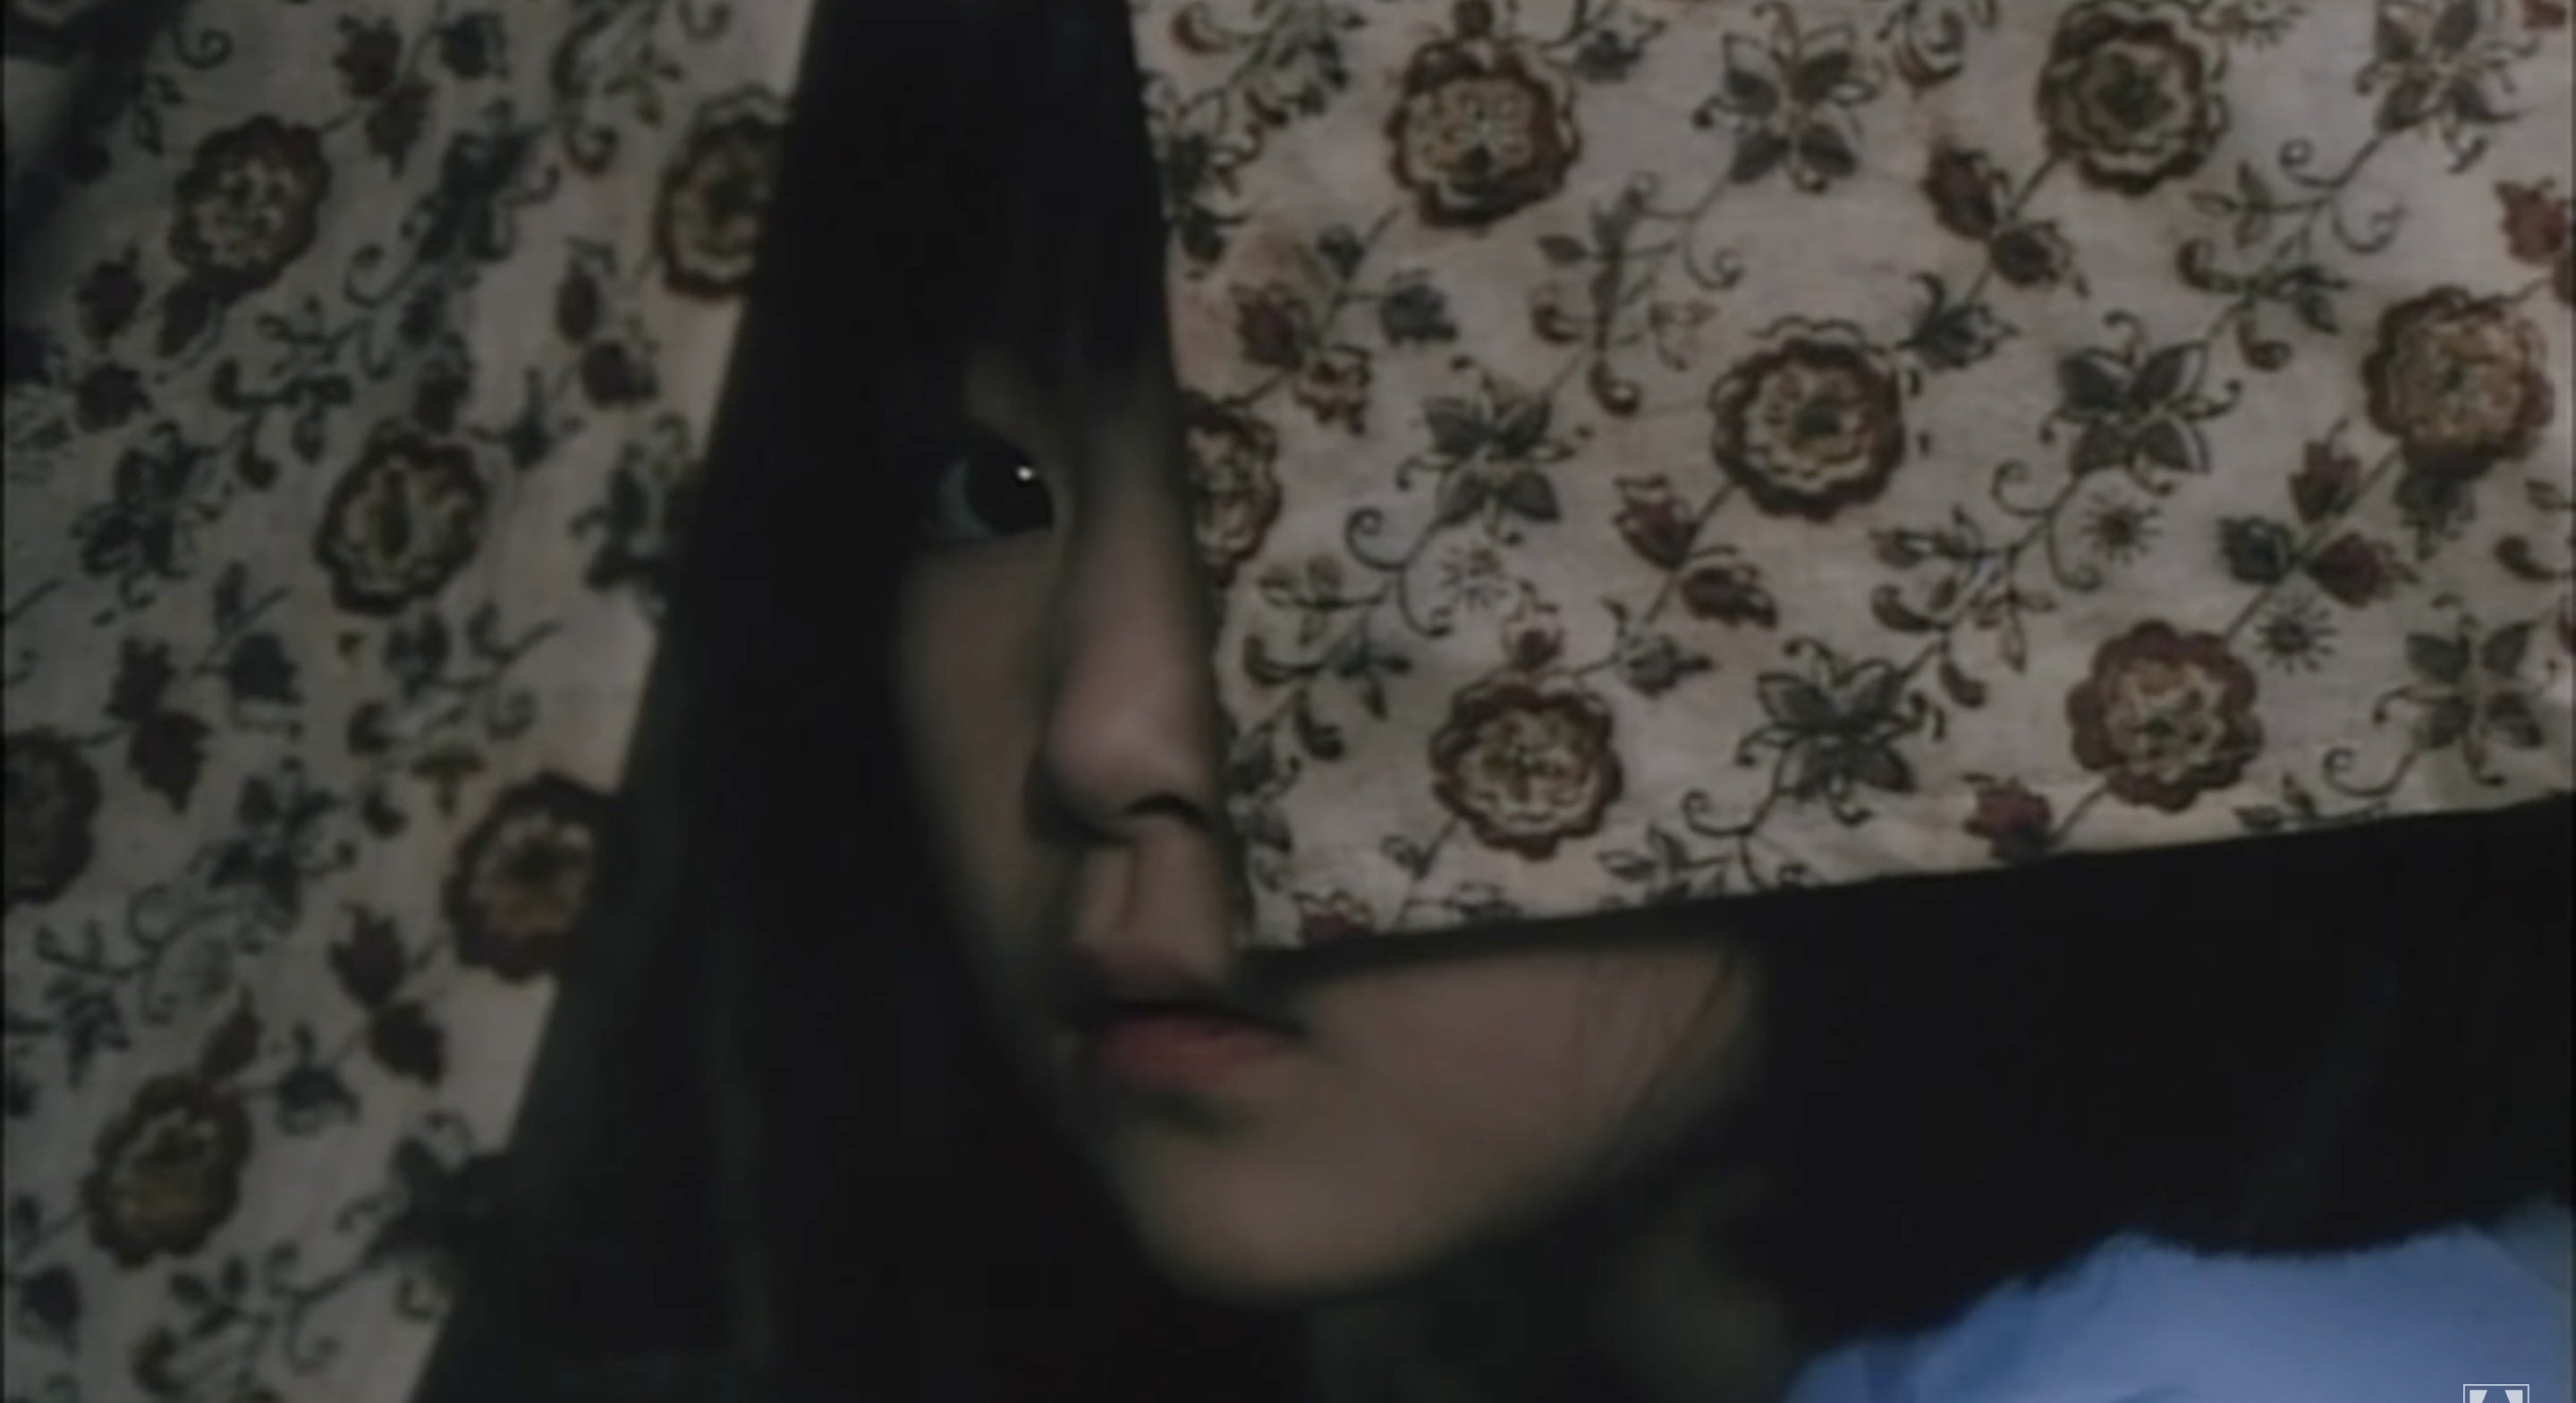 A scared-looking child whose face is partially covered